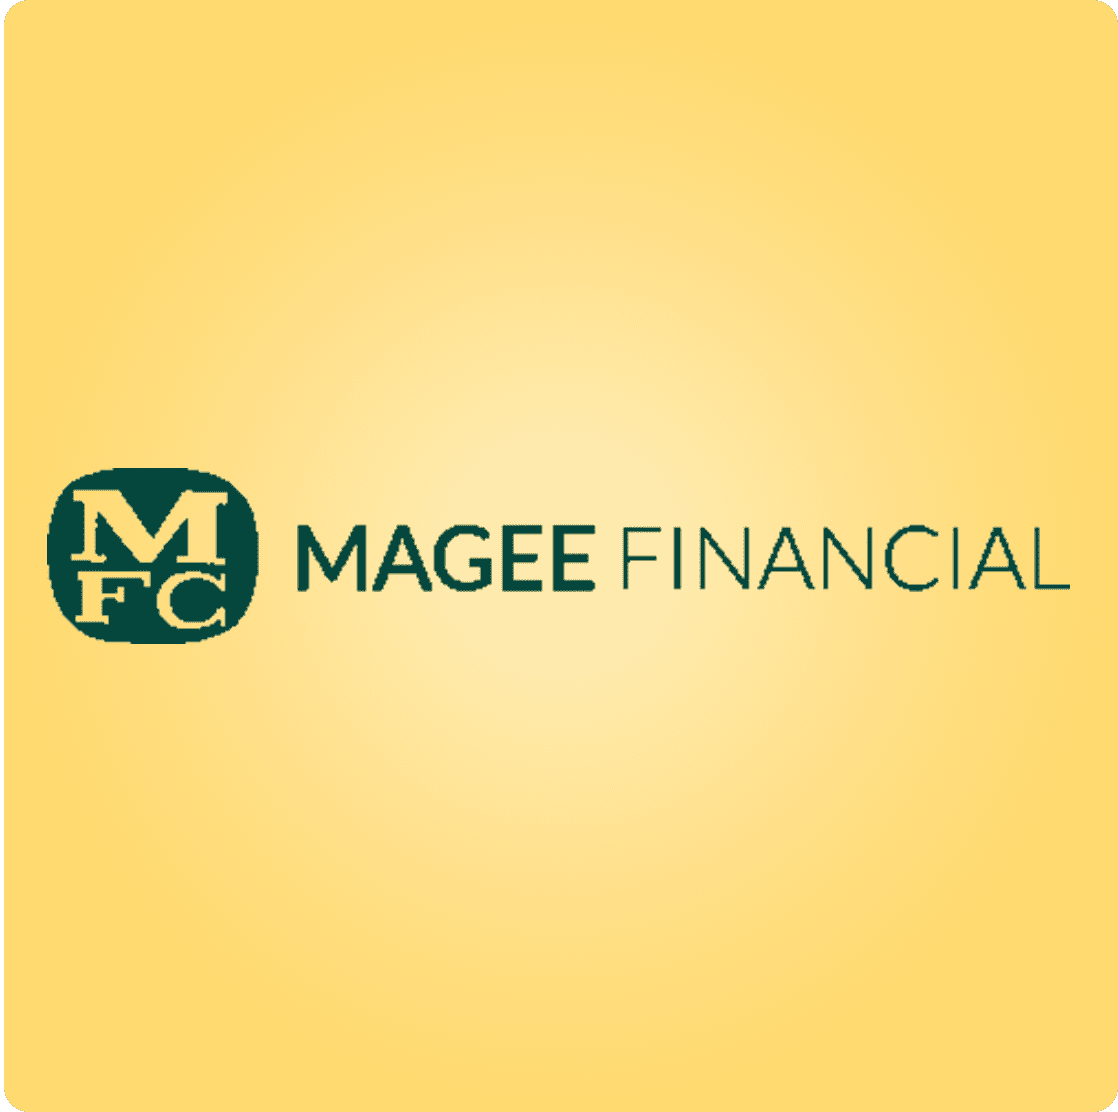 Magee Financial